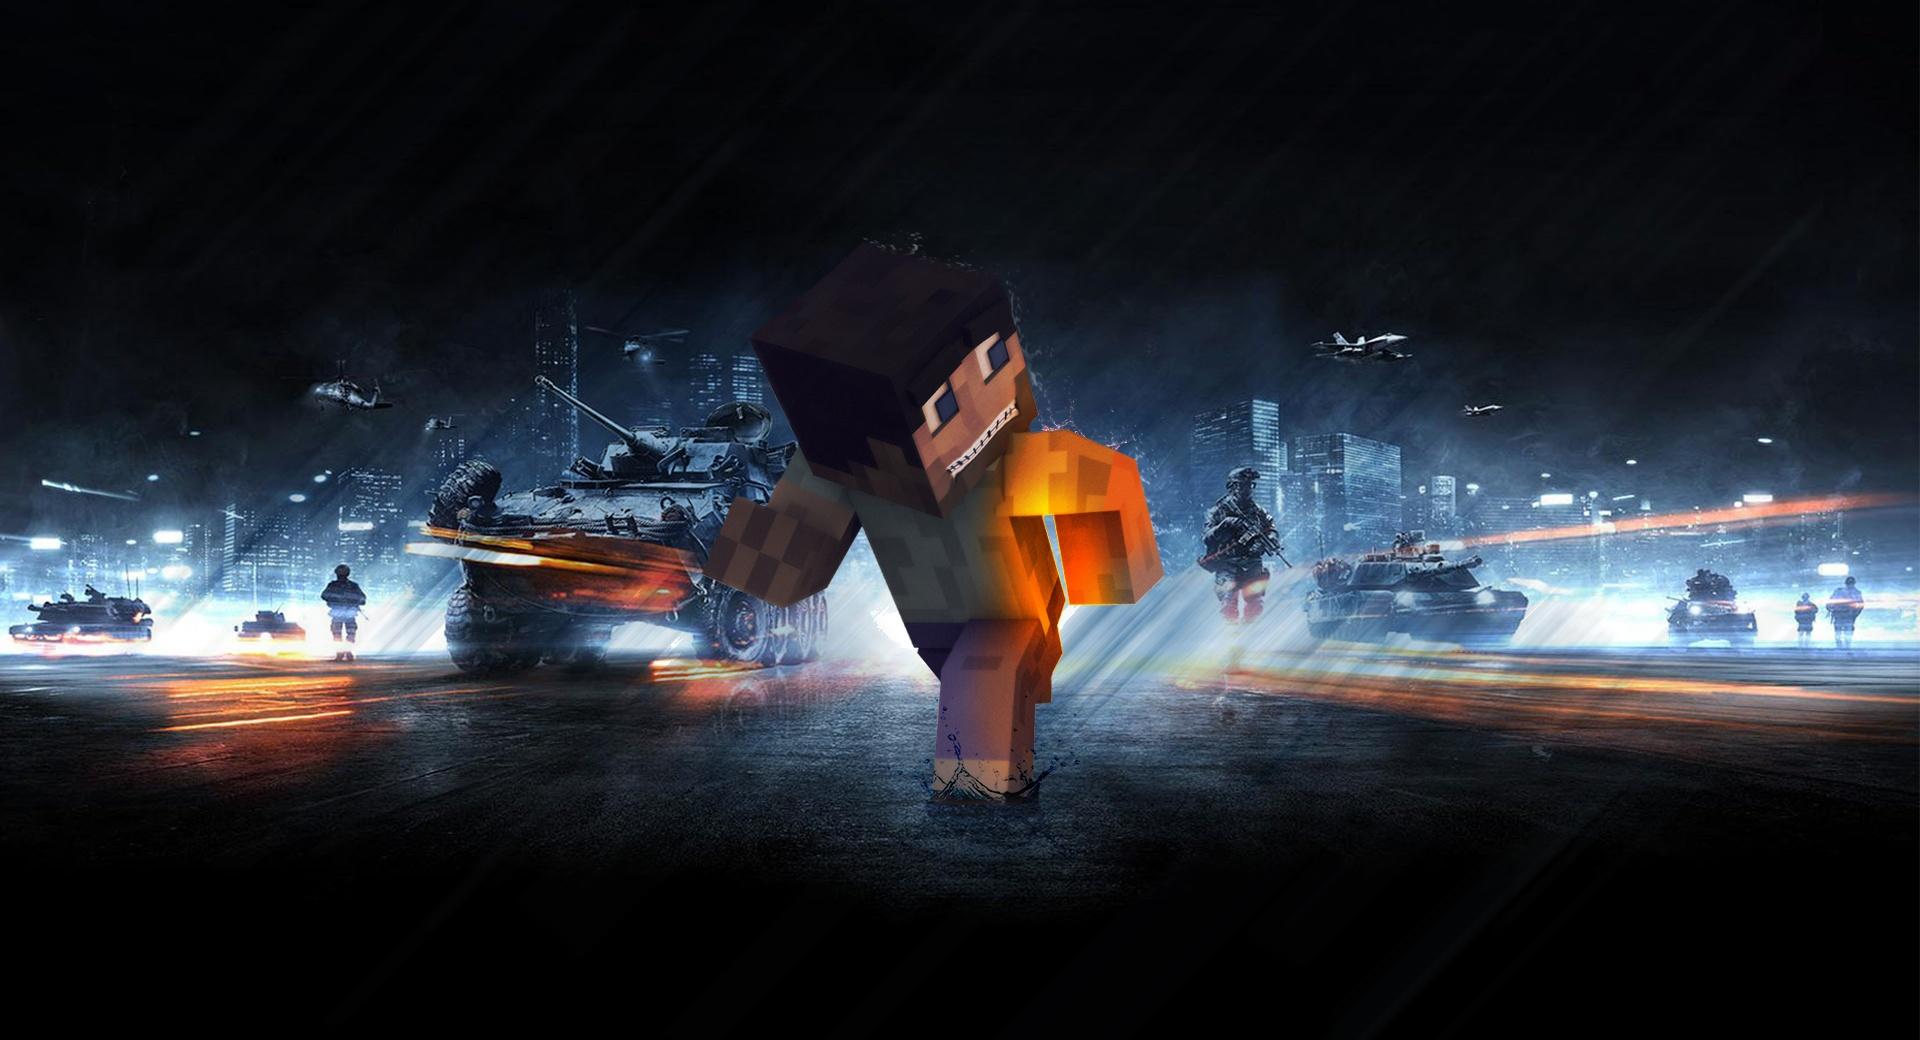 MineCraft In BattleField wallpapers HD quality